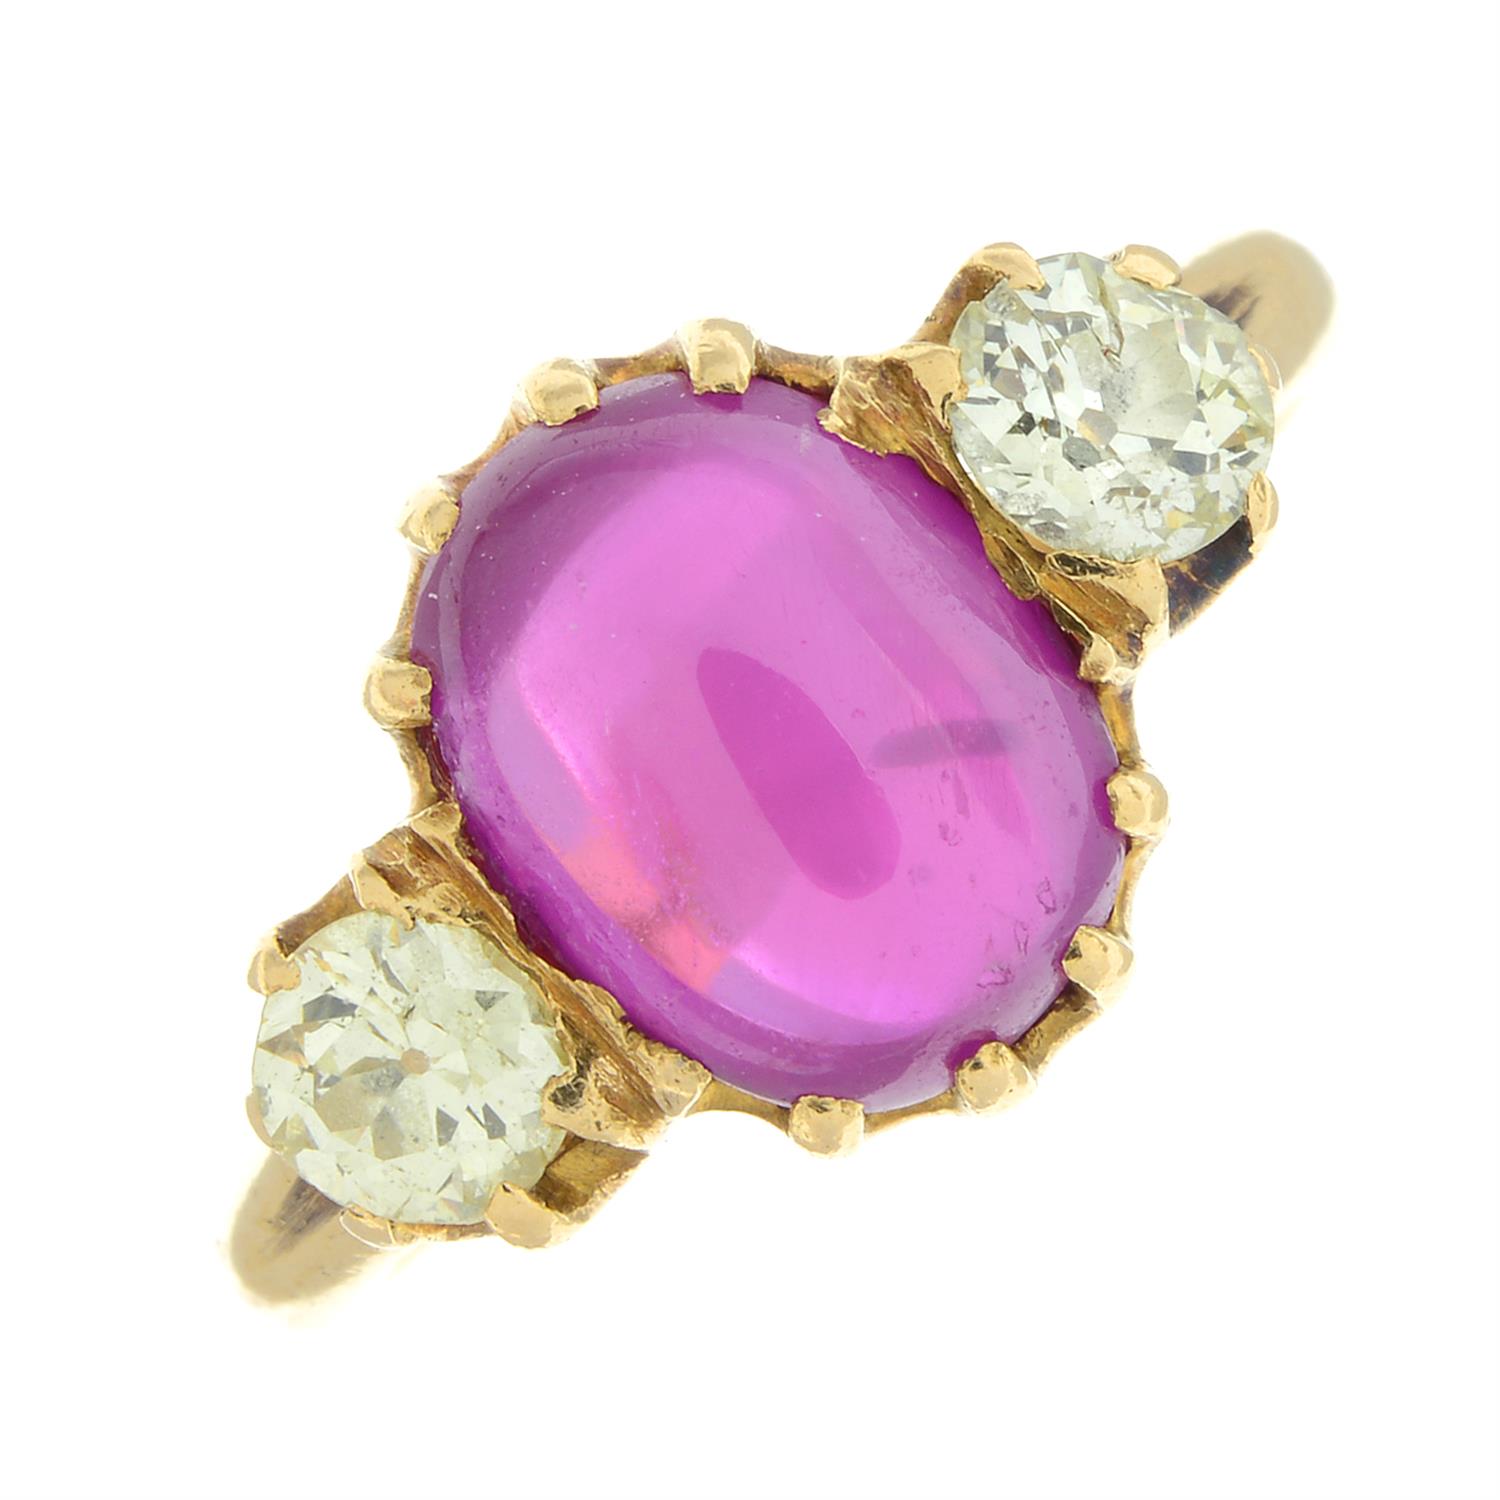 Late 19th century 18ct gold Burmese ruby and diamond ring - Image 2 of 5